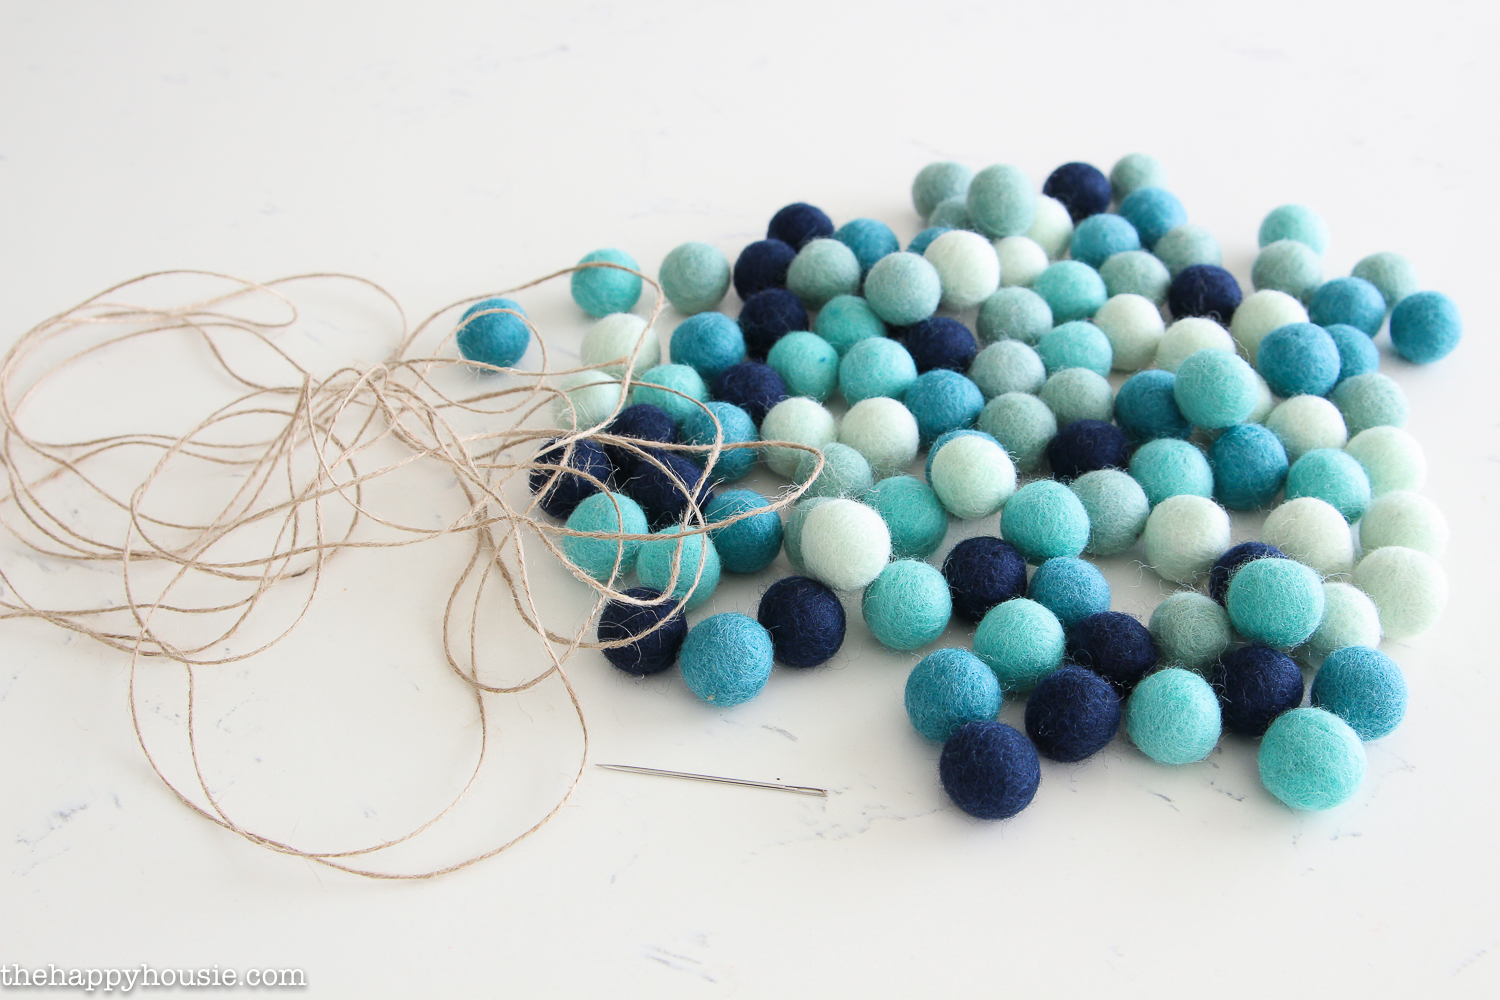 Light blue, dark blue and white felt balls on the counter with a needle and thread.